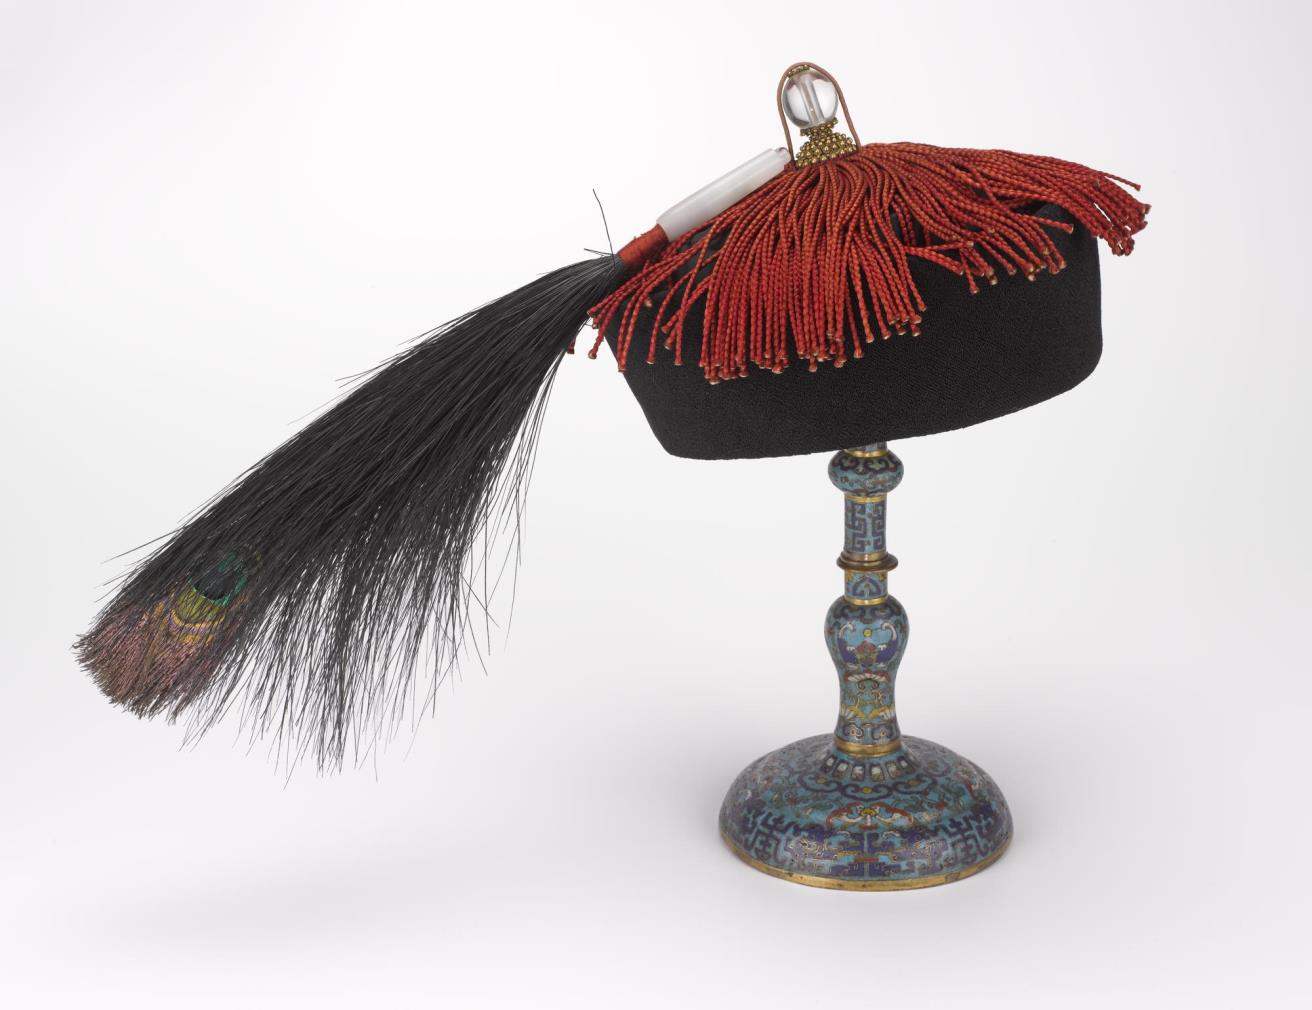 Semi-formal winter hat (jiguan), blue with red tassels and a plume, and with a glass button on top indicating fifth rank official: China, Qing Dynasty, 19th century AD. Lent by Her Majesty the Queen.